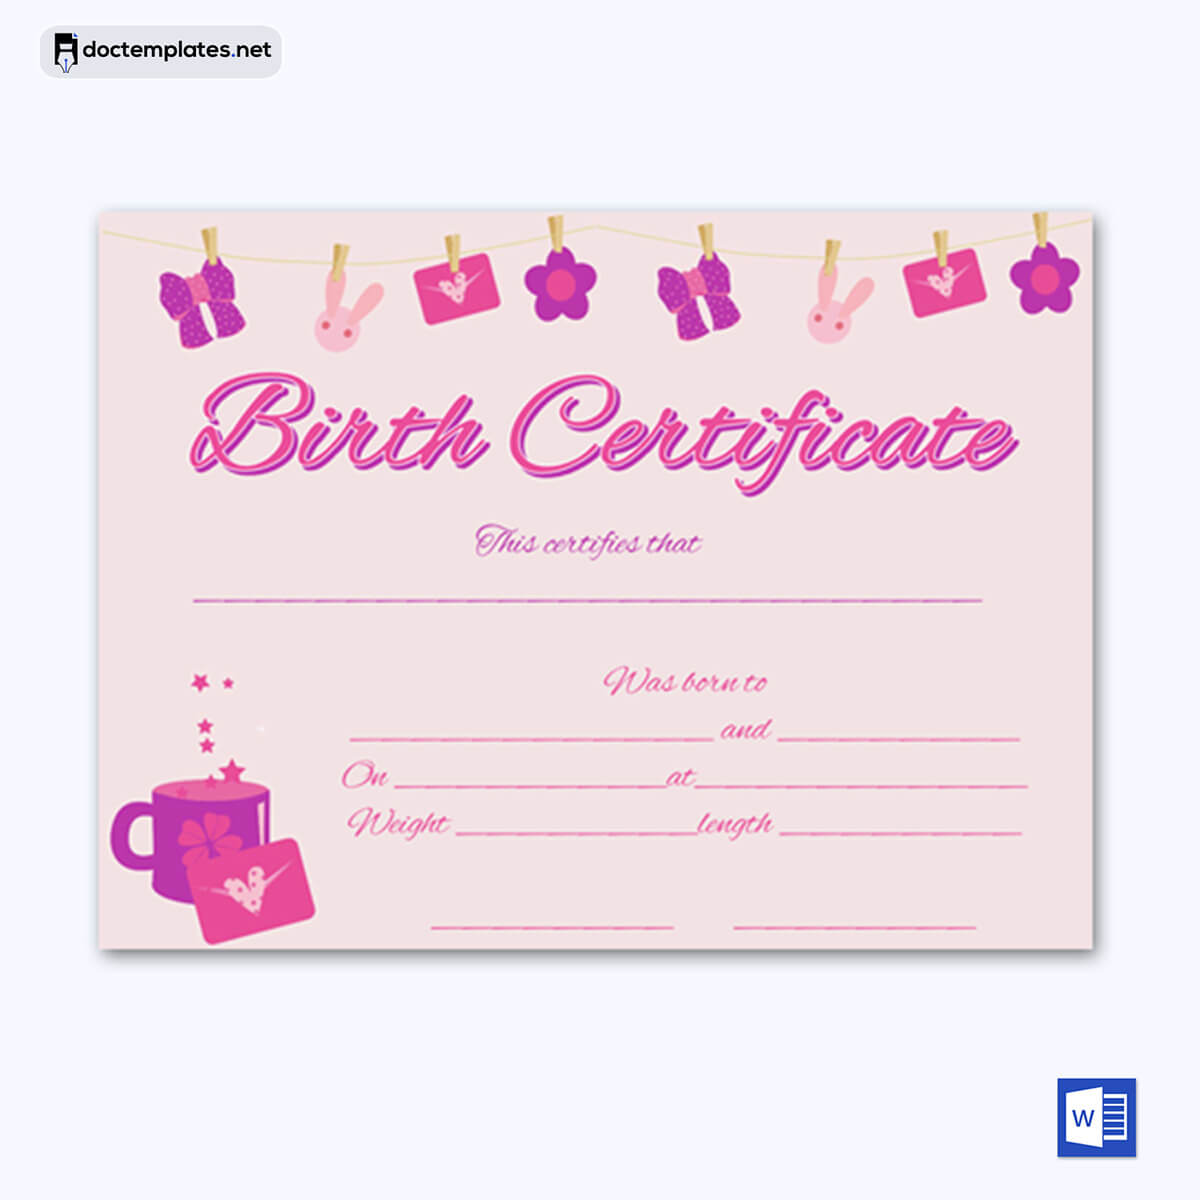 Image of Free birth certificate template
Free birth certificate template
 09